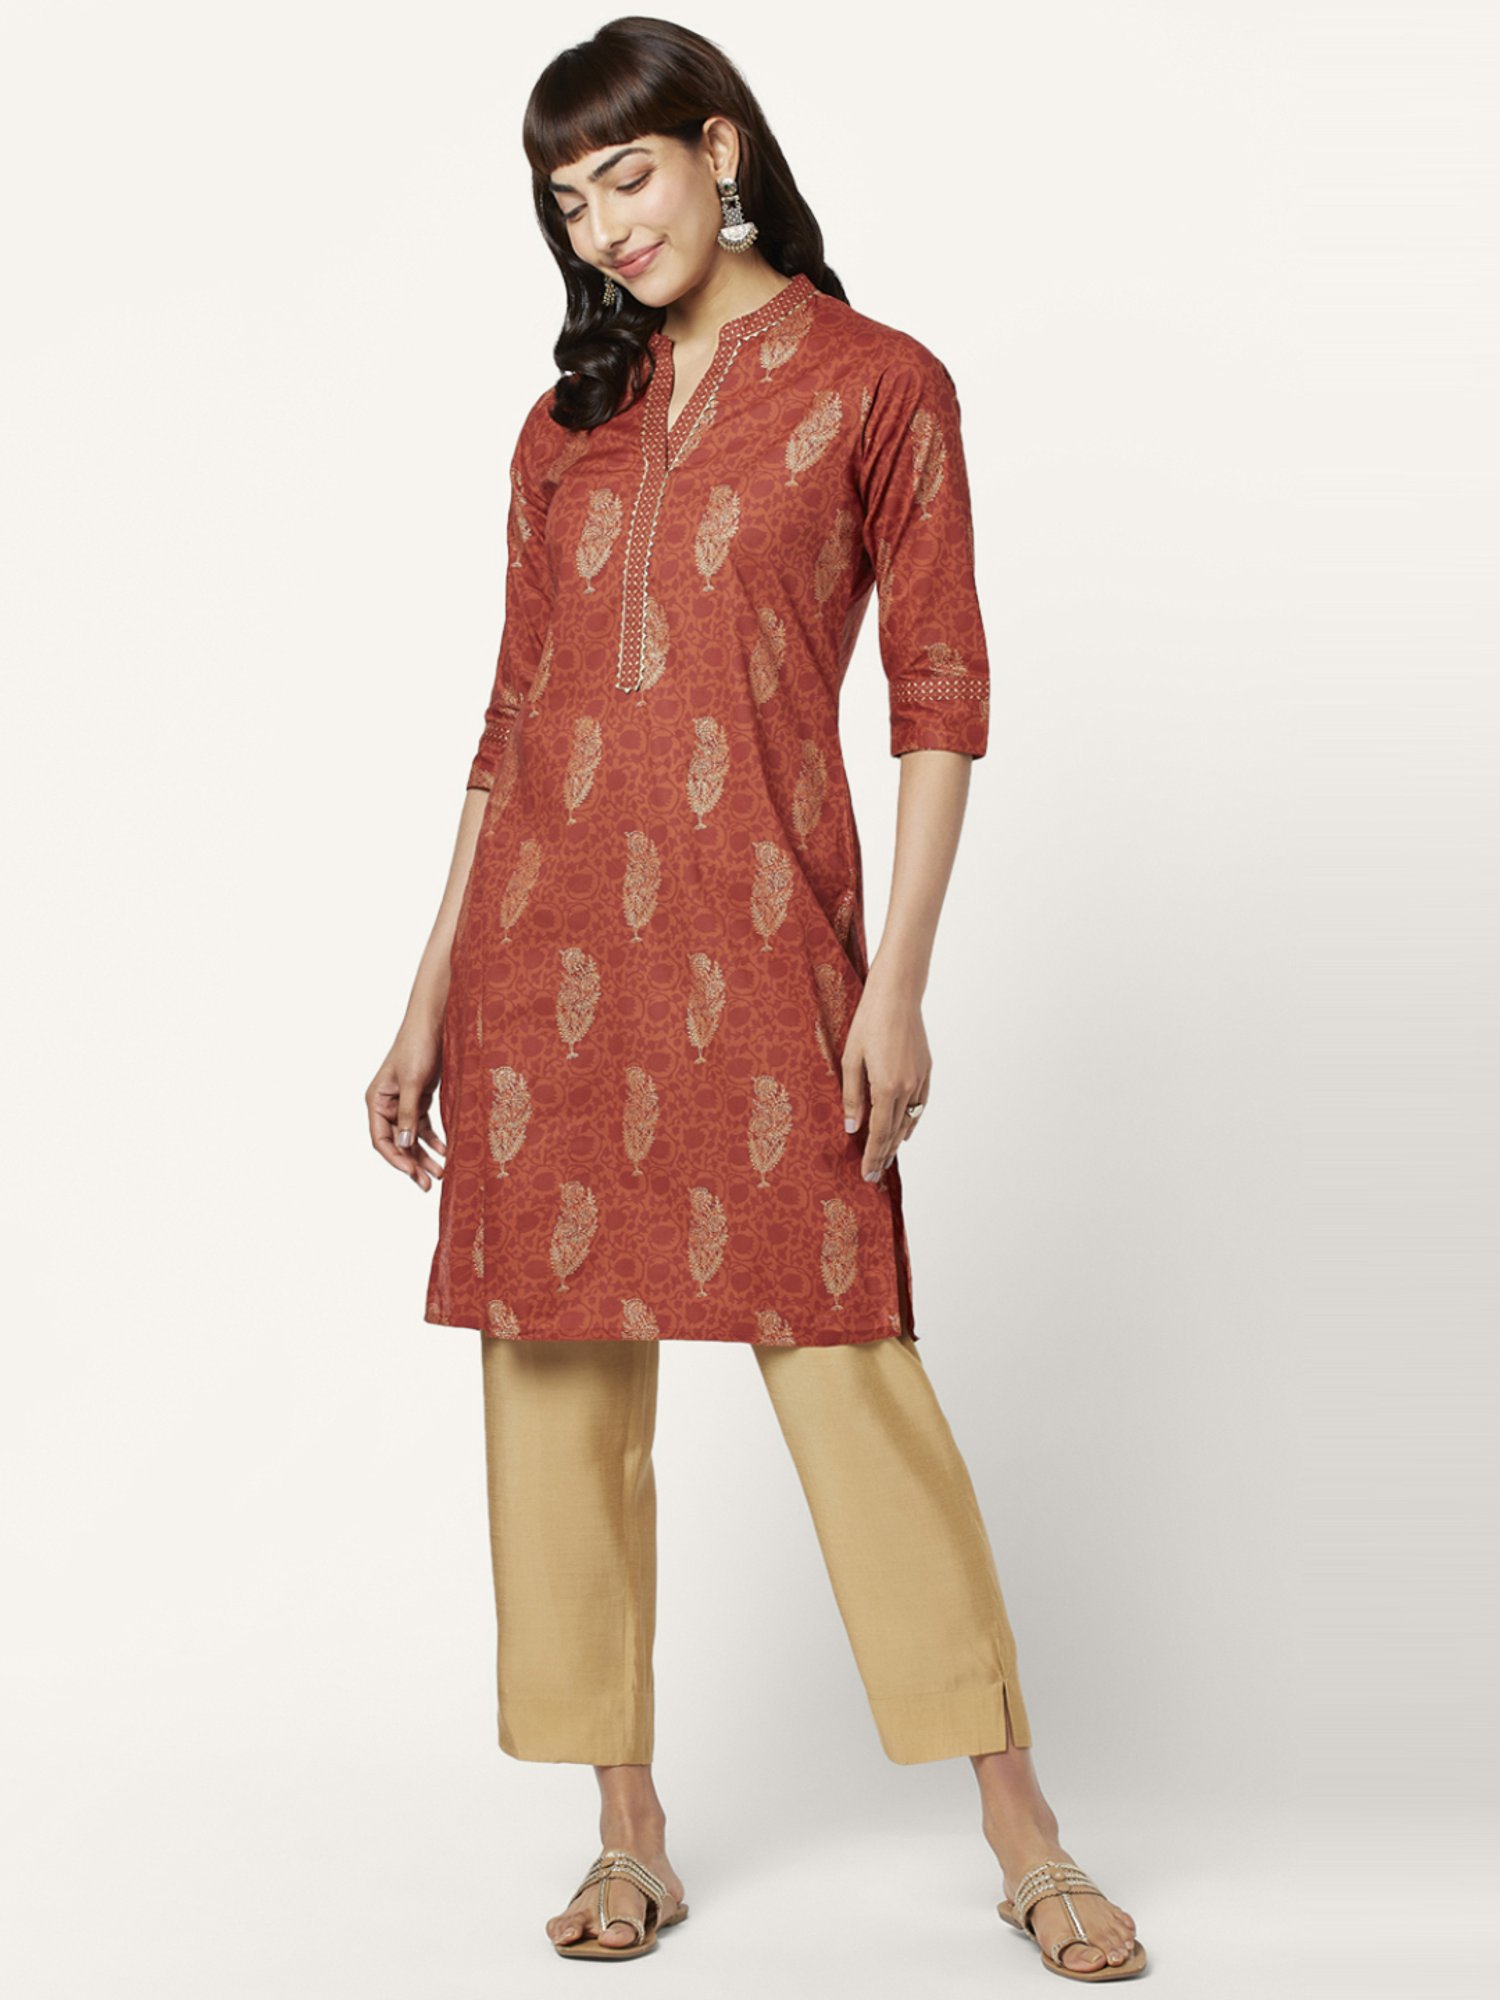 Buy Rangmanch by Pantaloons Women's Cotton a-line Kurta  (110050207_Red_Small) at Amazon.in